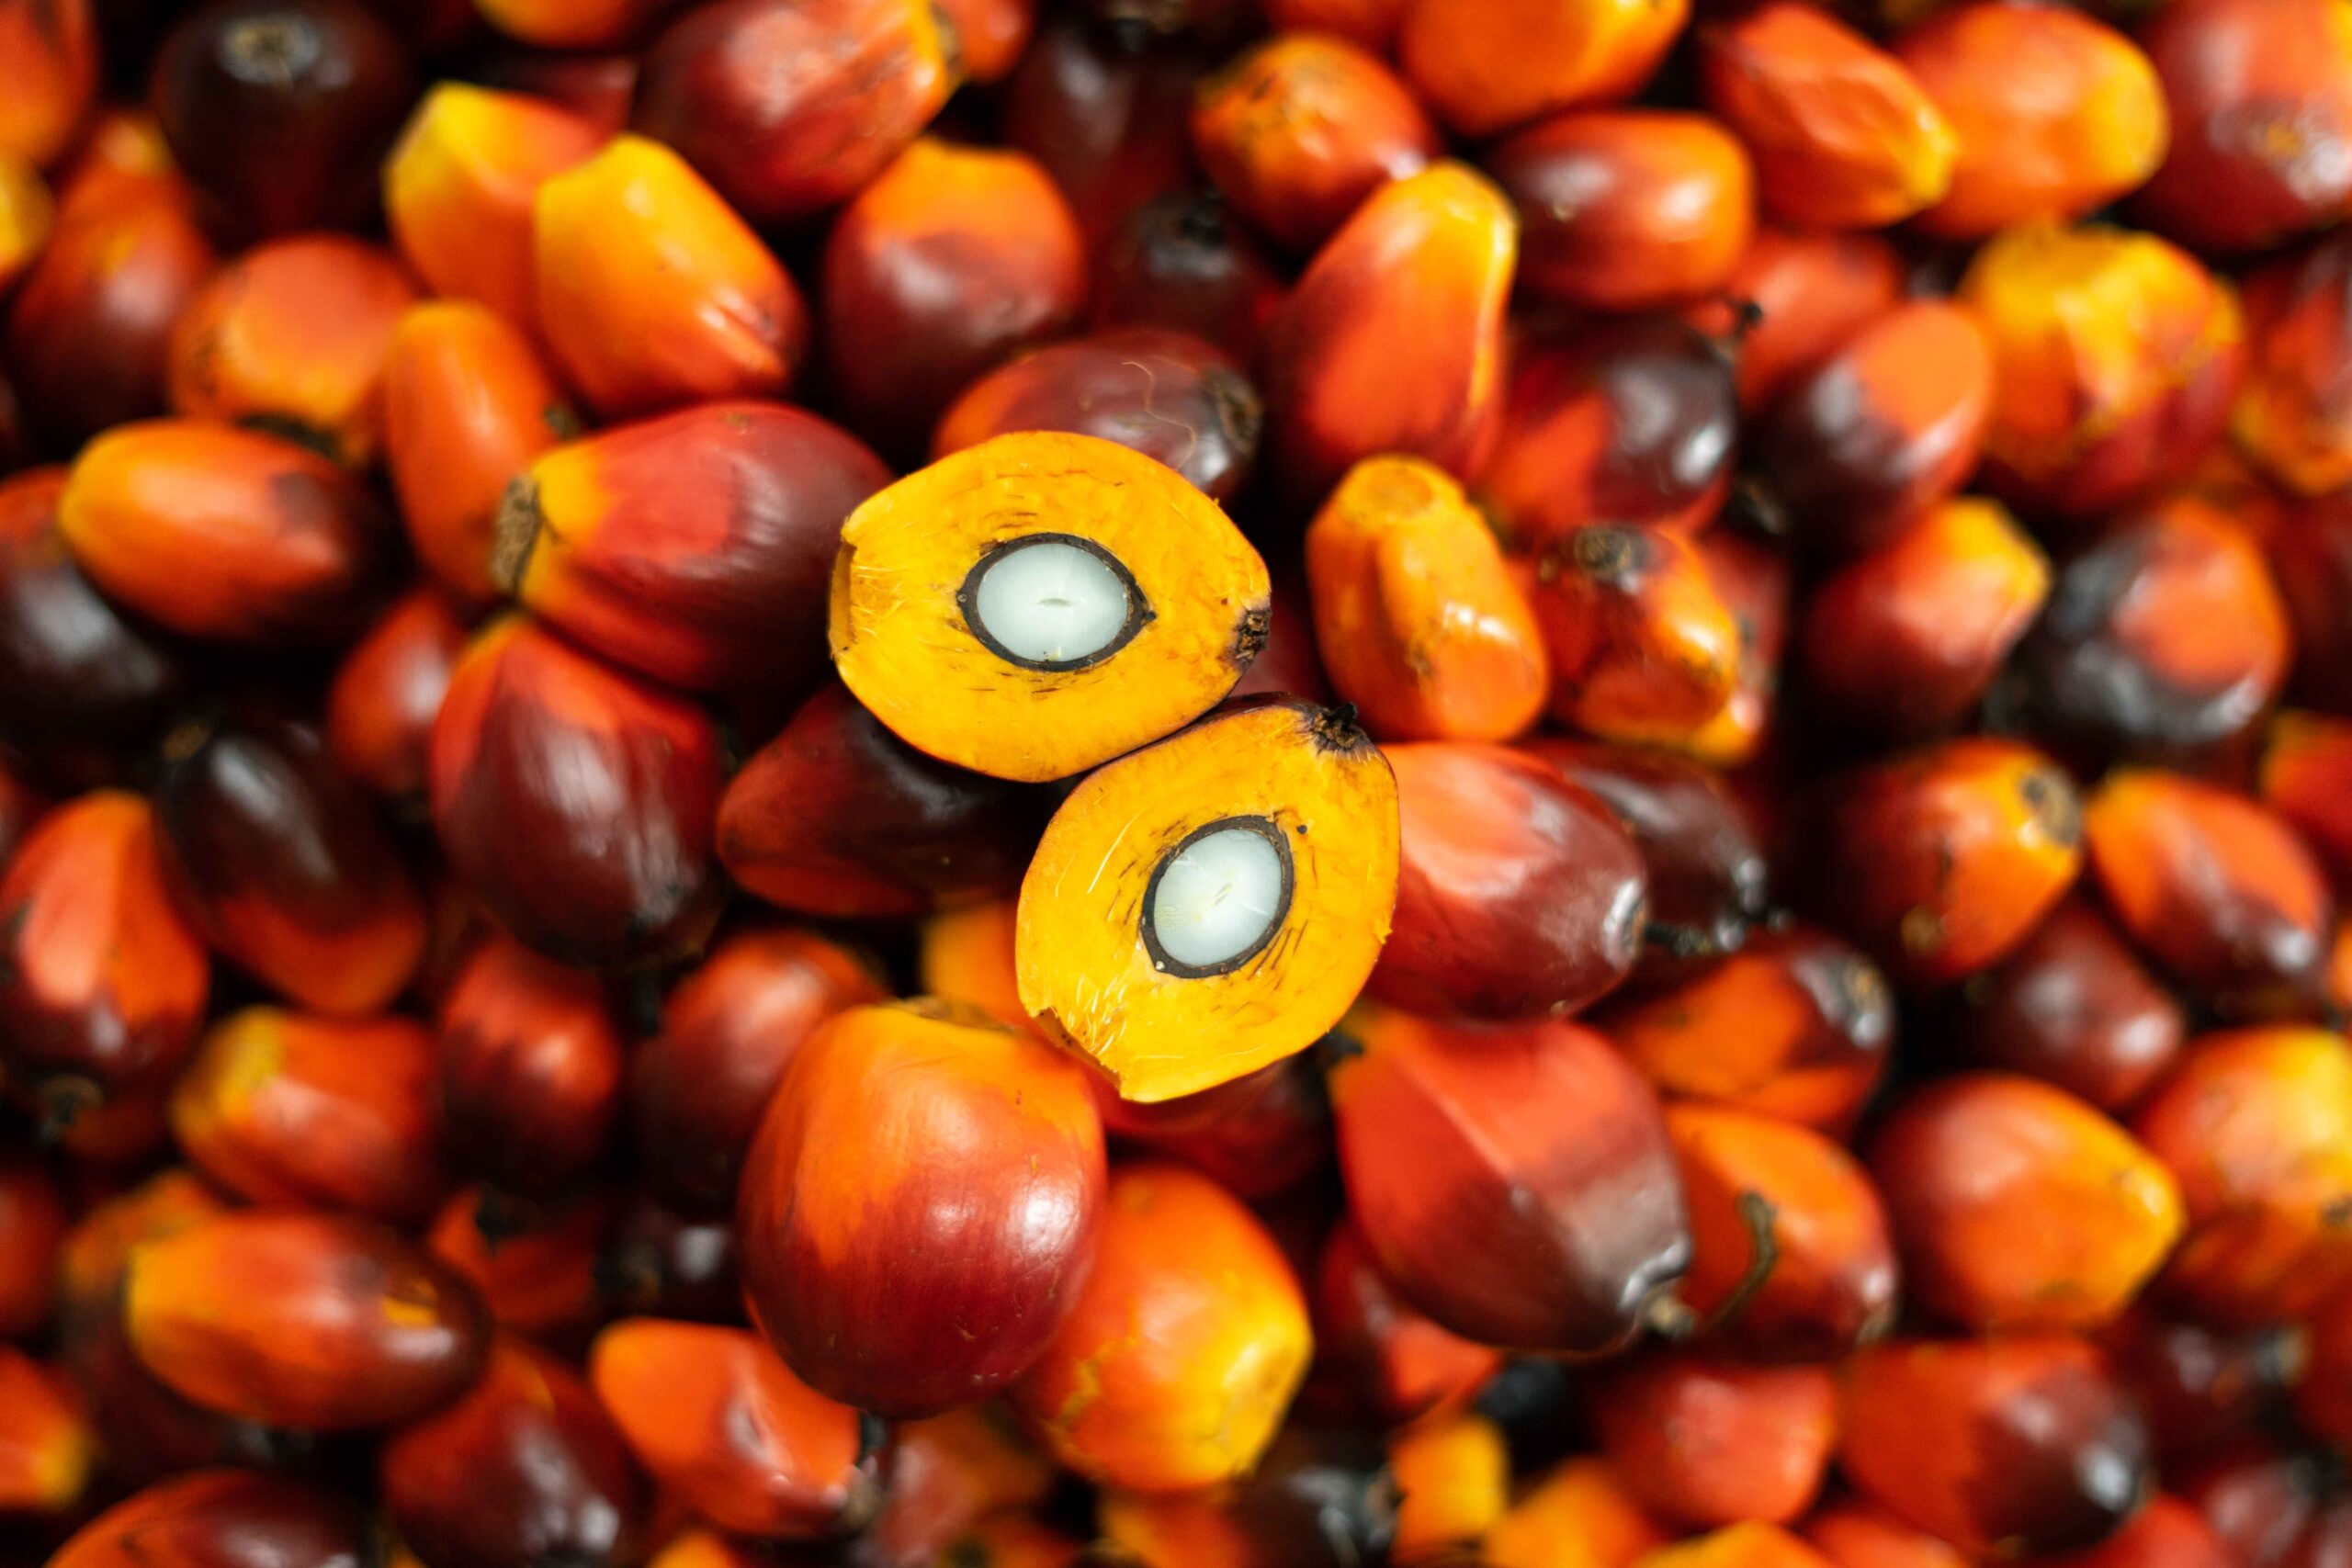 Oil palm fruitlets cross section showing mesocarp and kernel